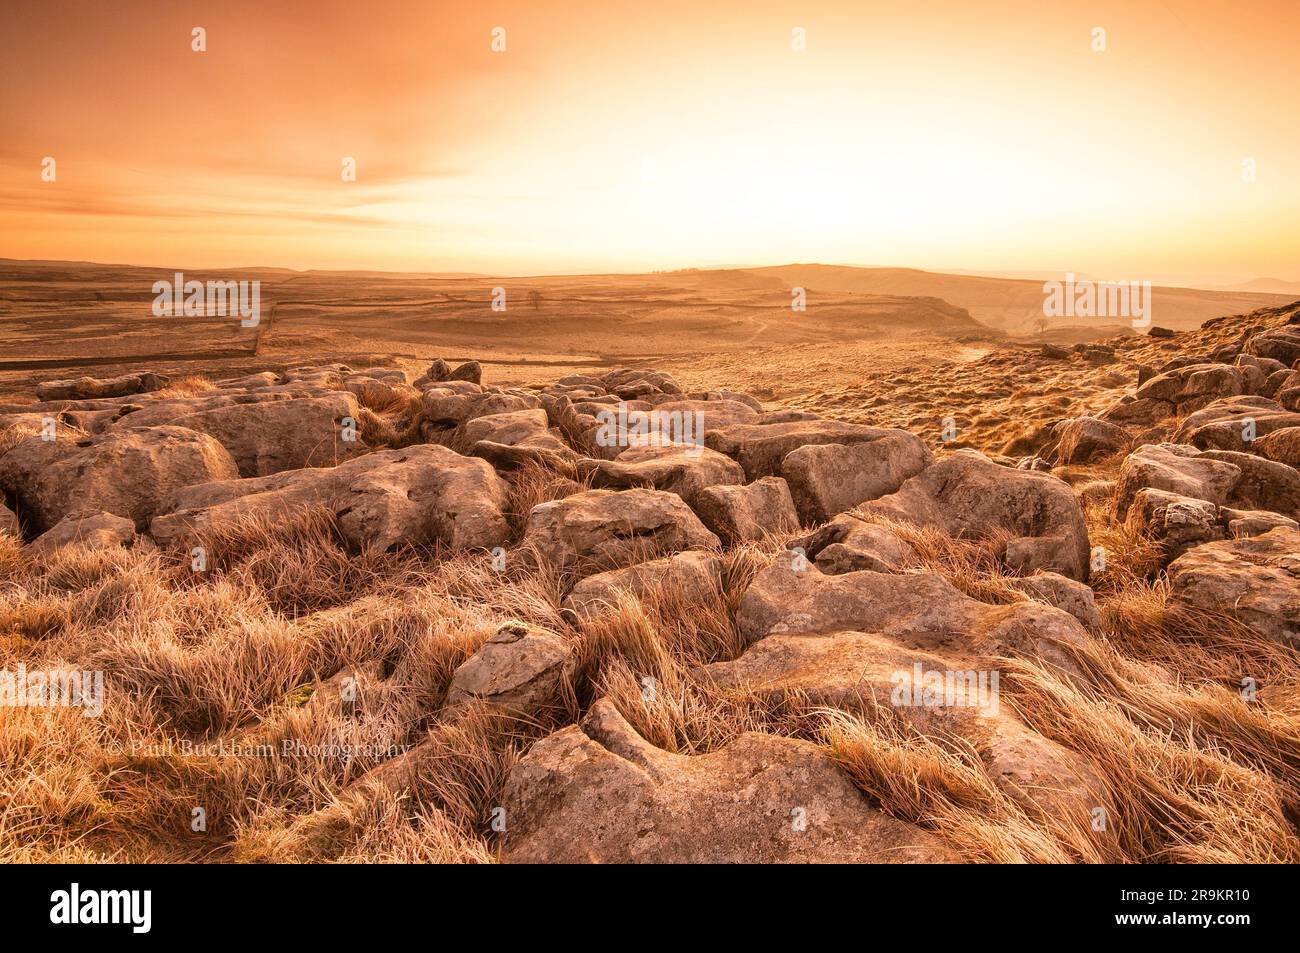 An epic and majestic sunset over a rugged and desolate landscape, isolated from civilization Stock Photo